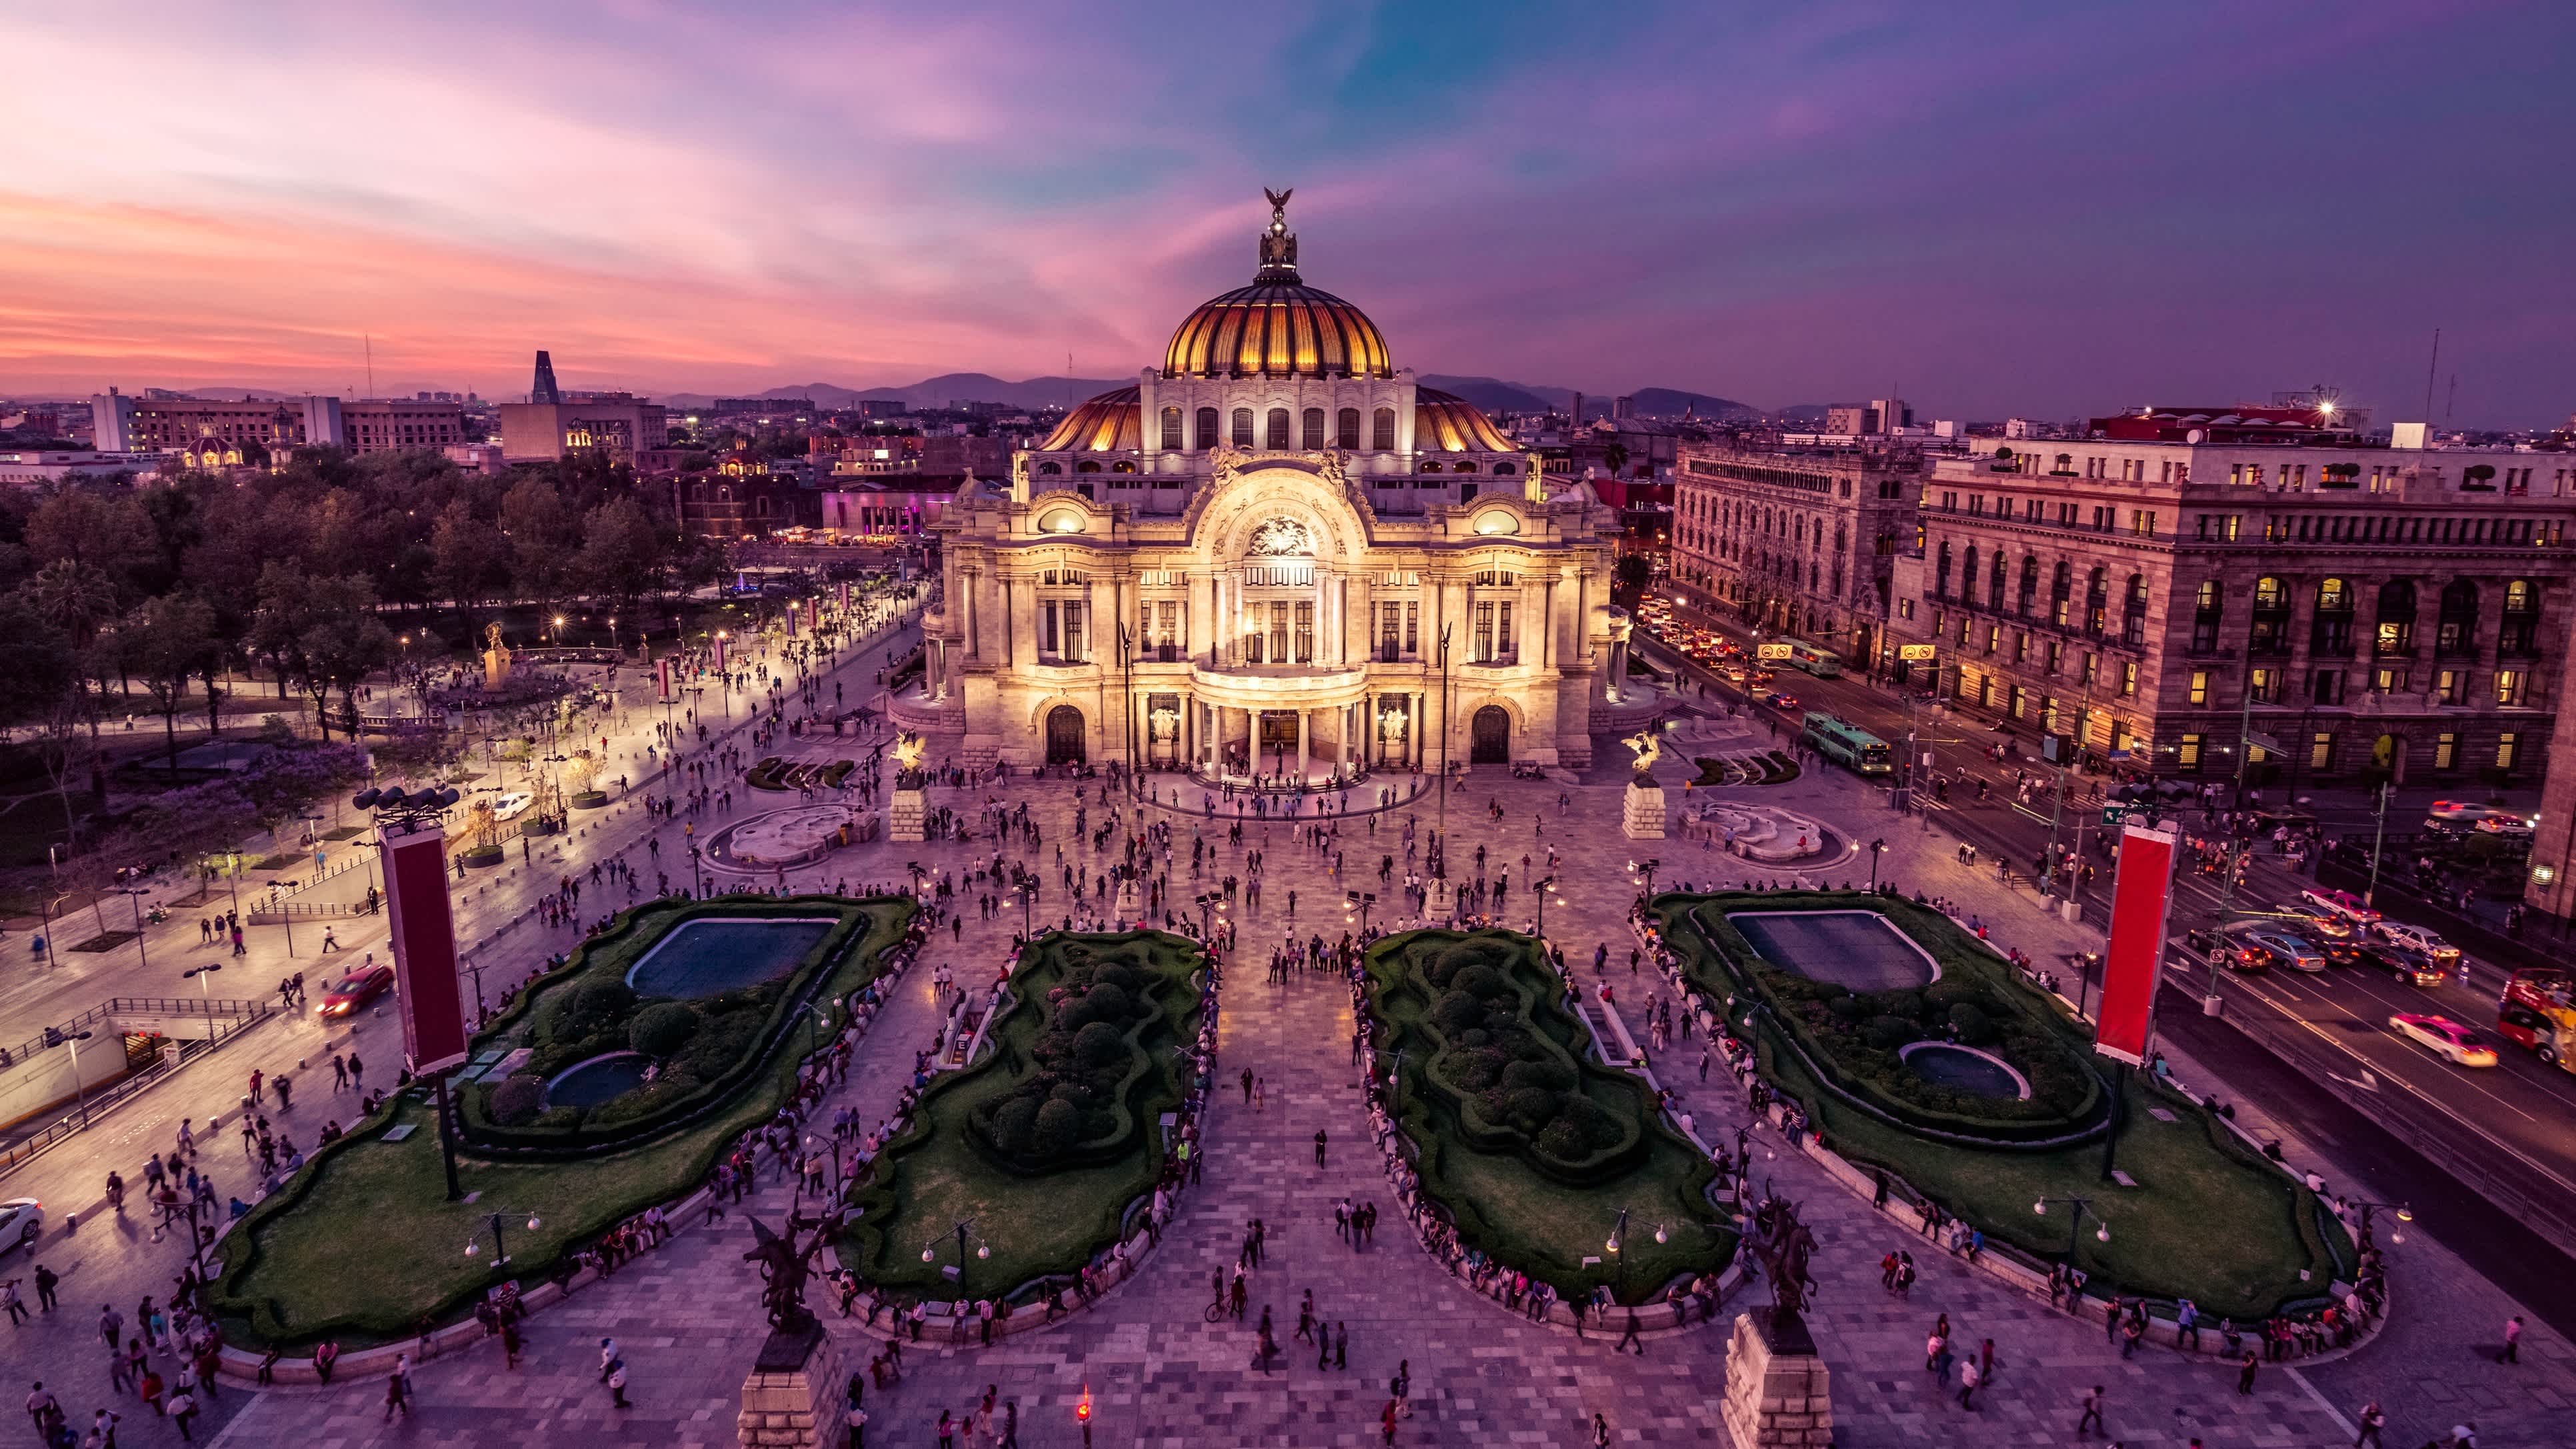 View from the air on the Palacio de Bellas Artes in Mexico City at dusk